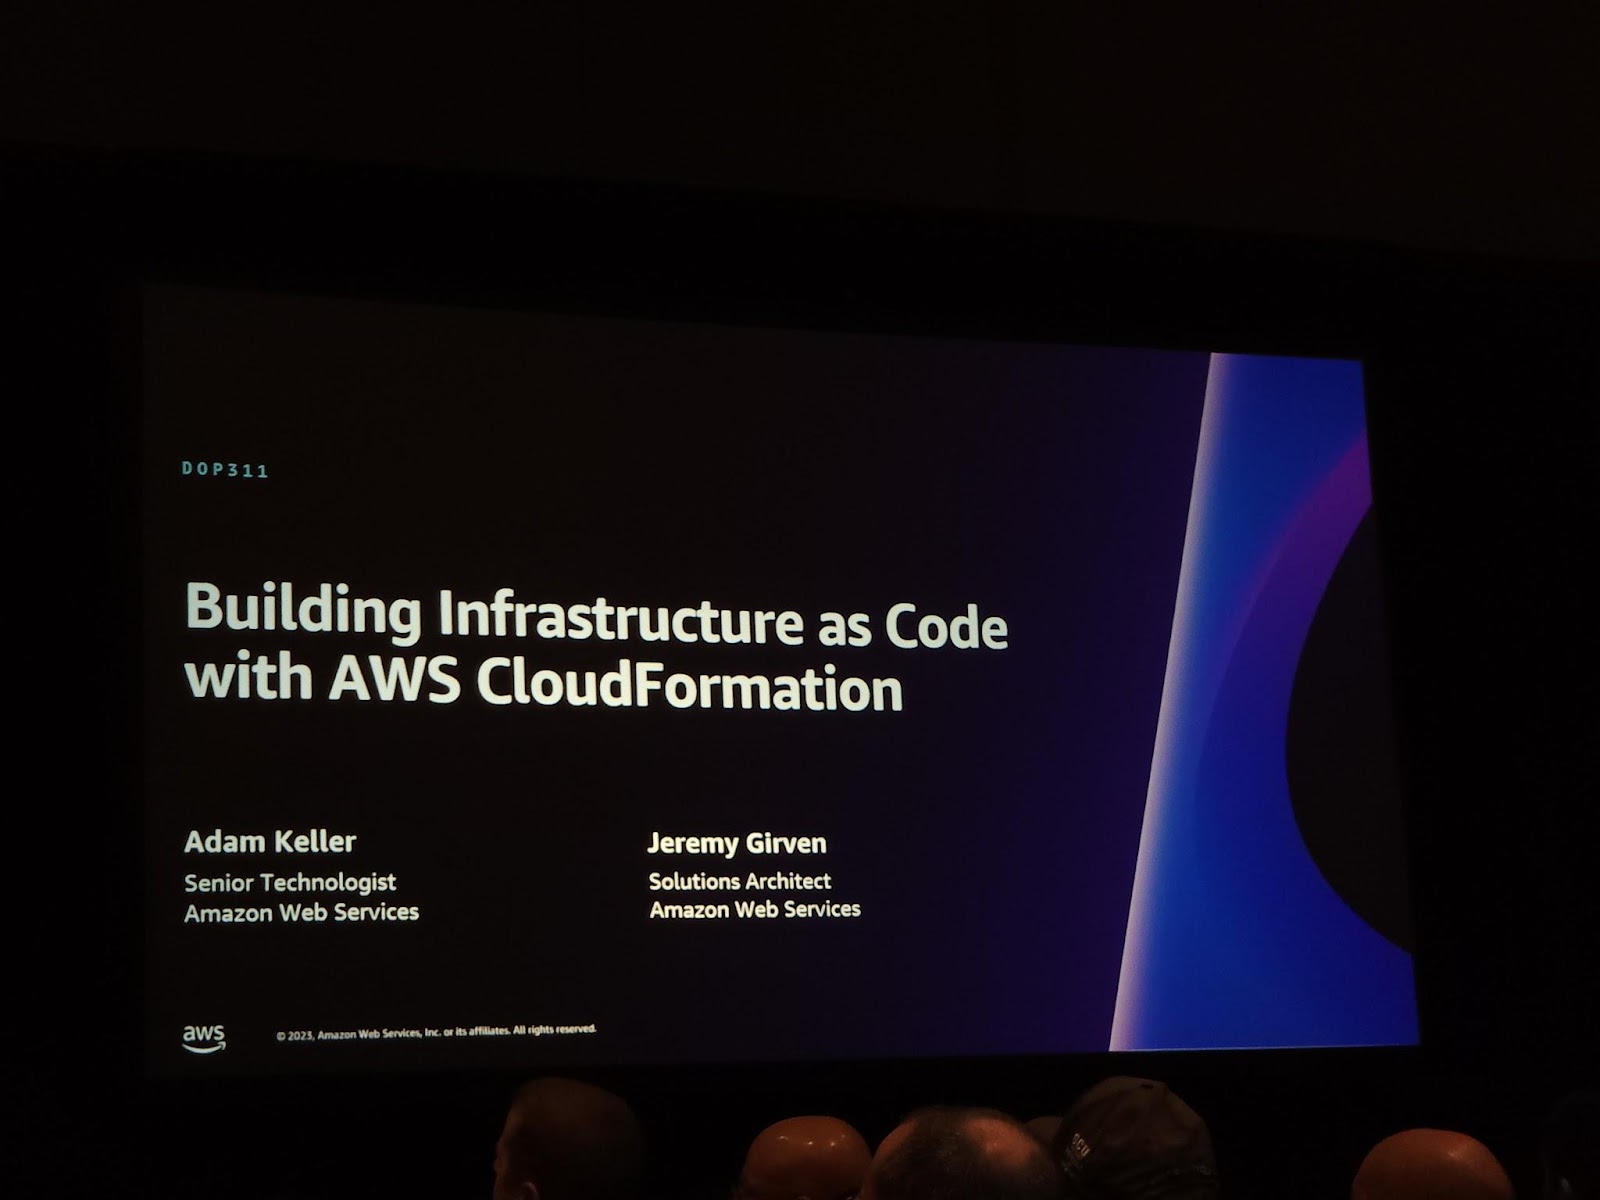 Building infrastructure as code with AWS CloudFormation